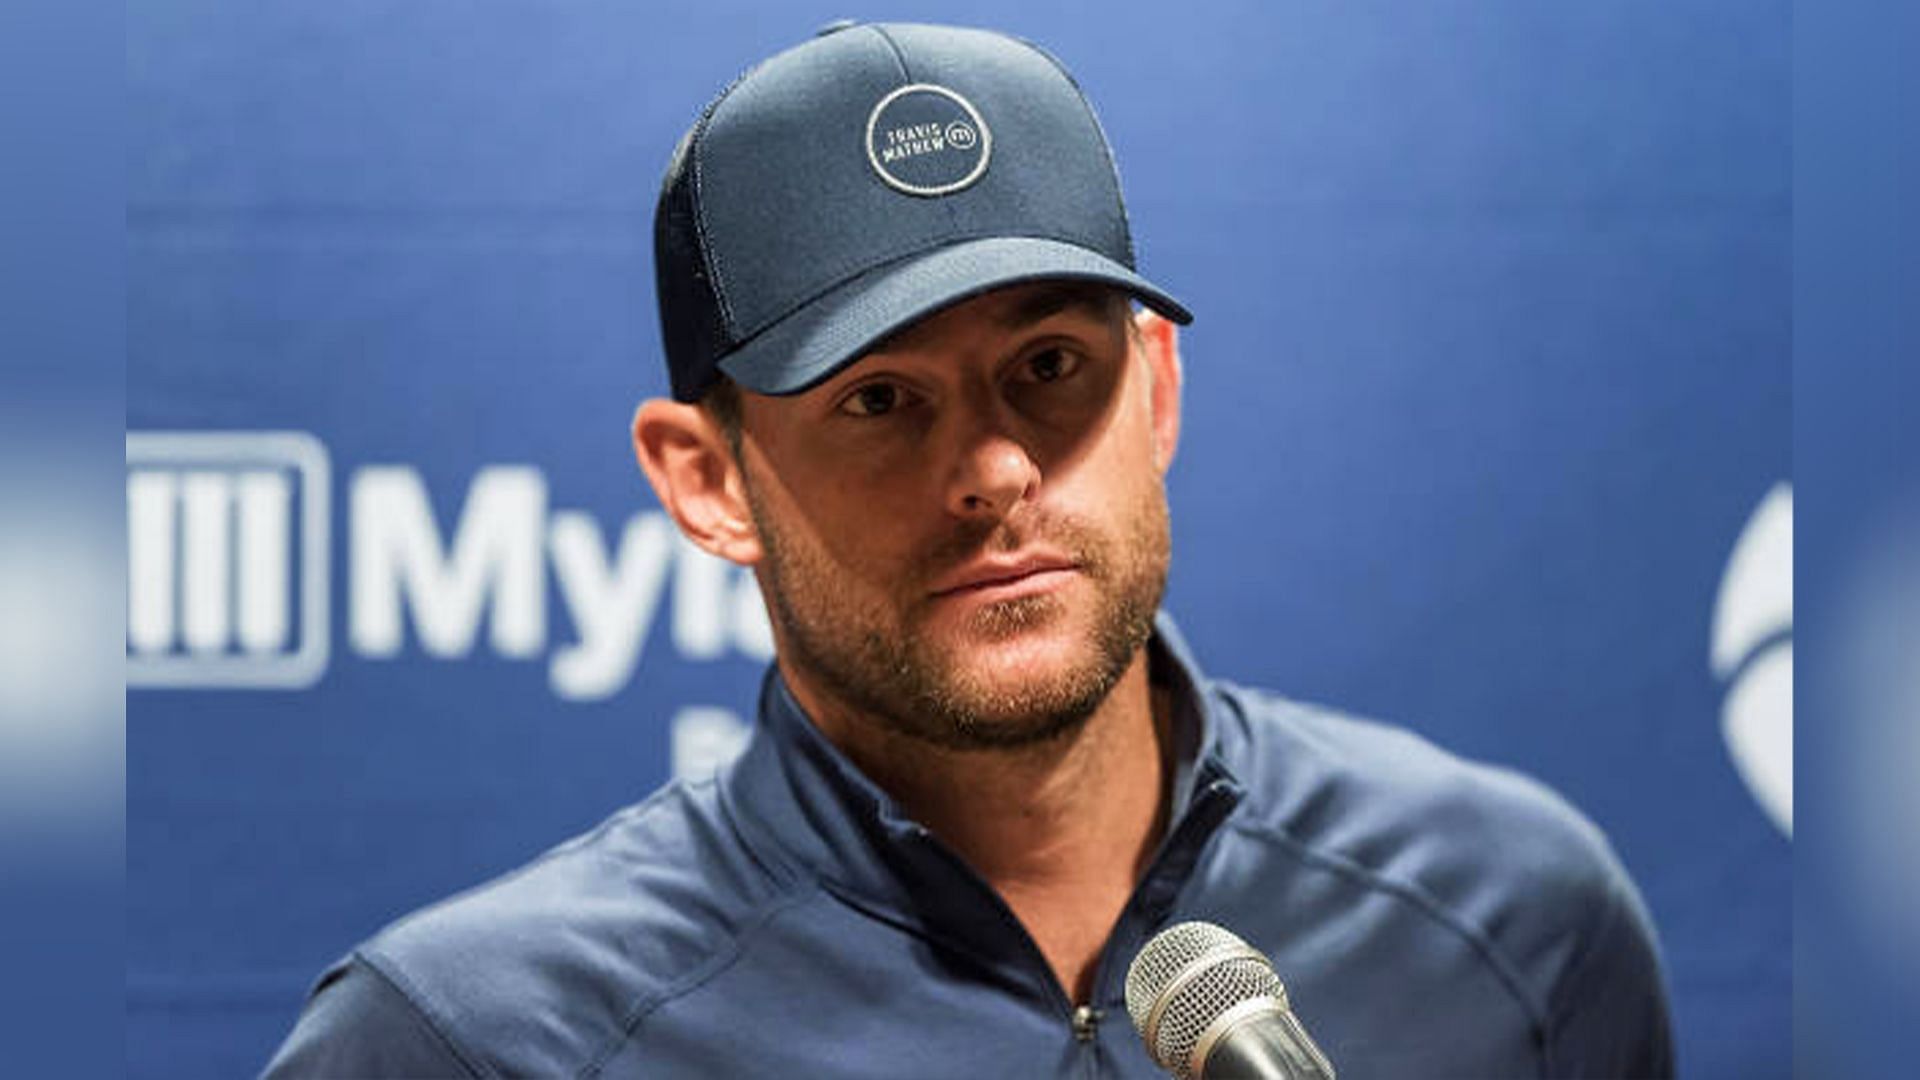 Andy Roddick announces partnership with Betway